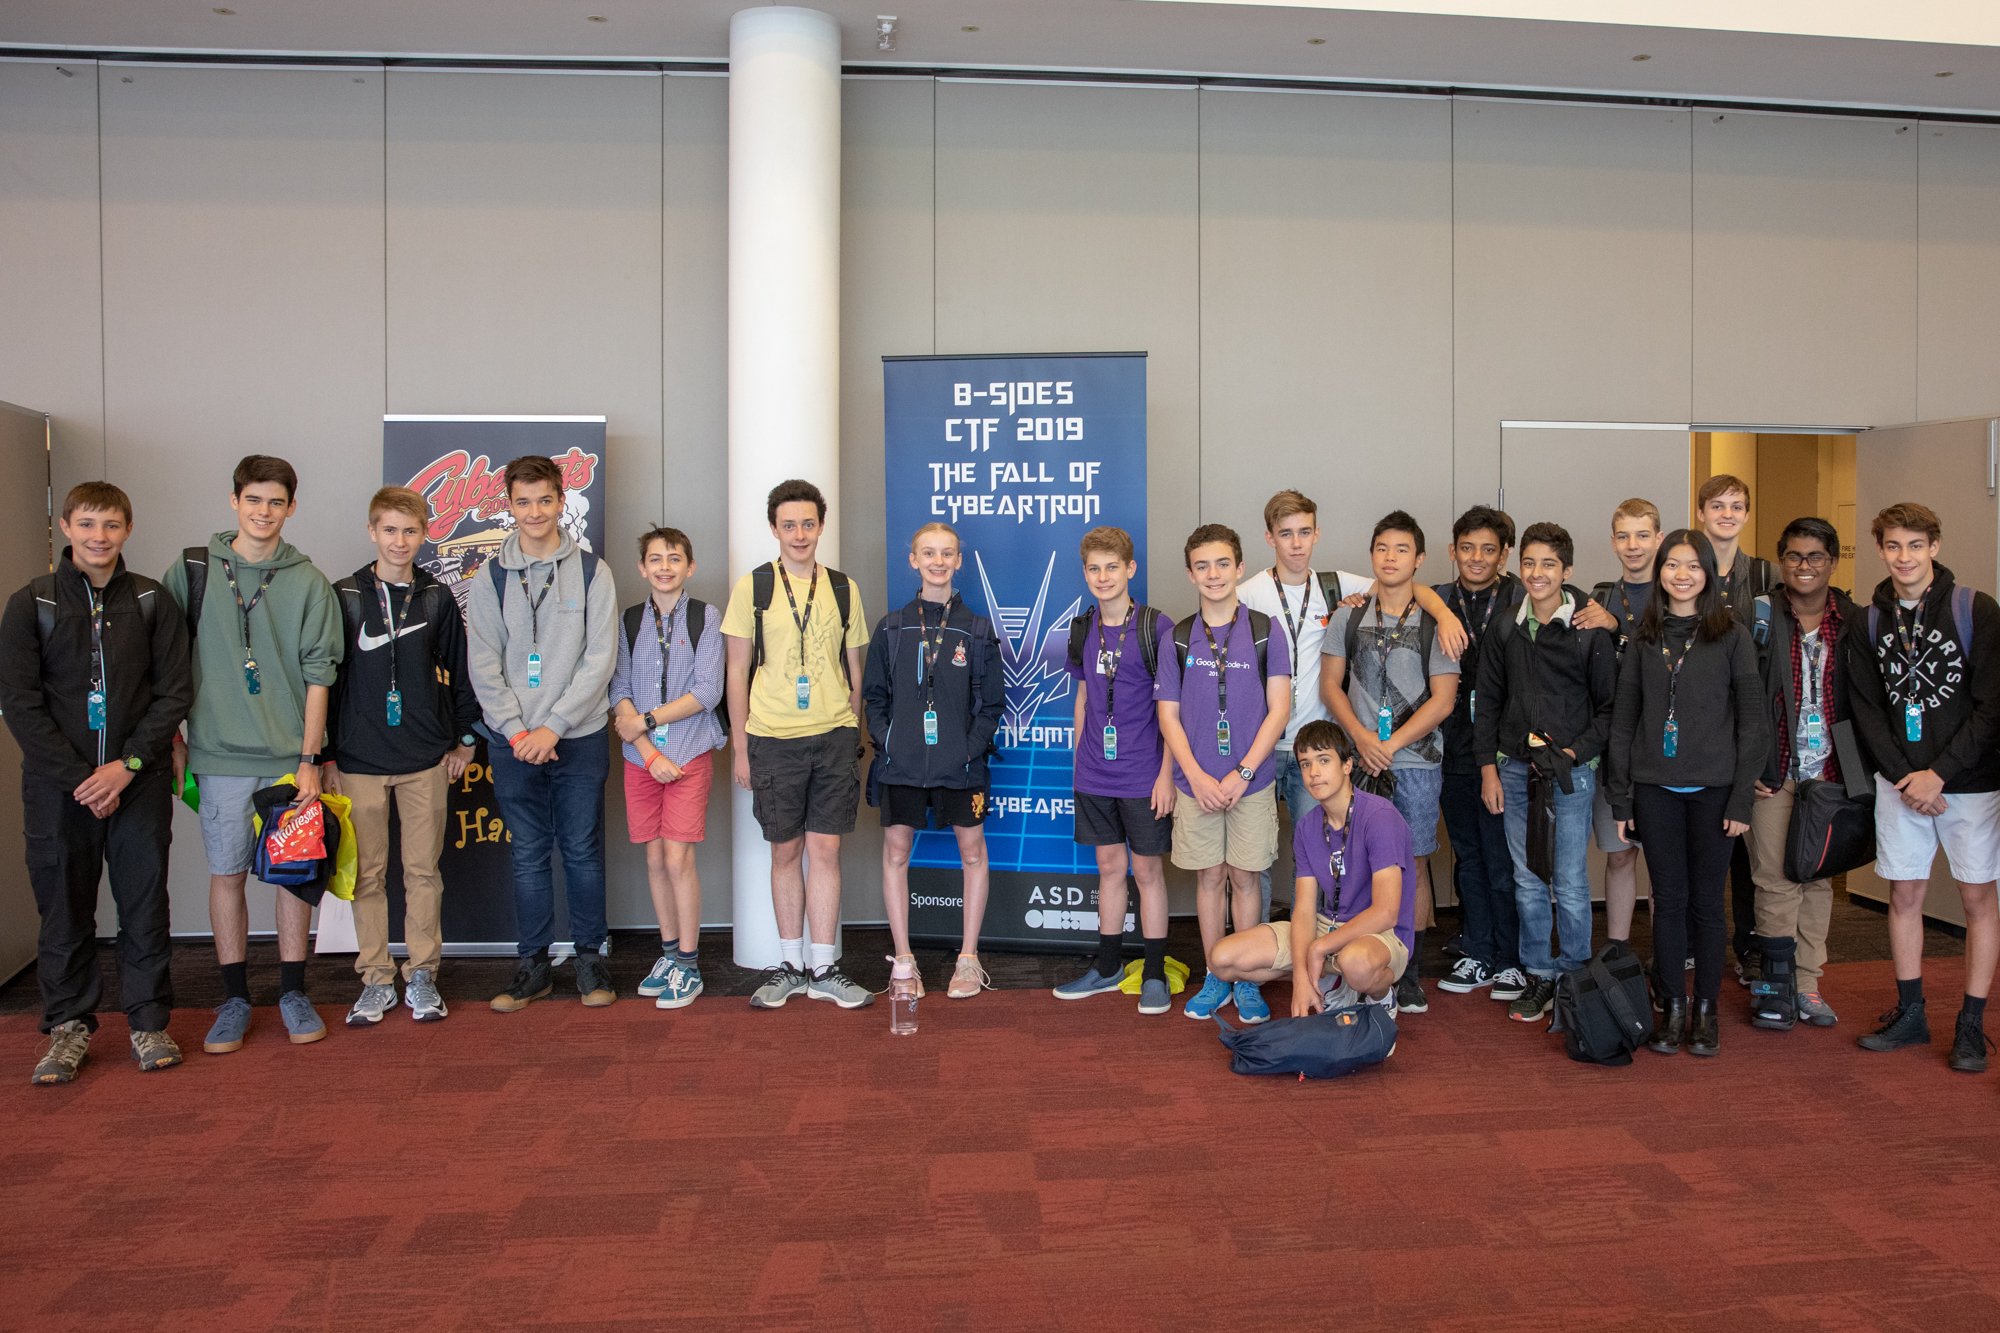 Students pose for a photo in front of a banner that reads 'BSides CTF 2019 - The fall of Cybeartron'.